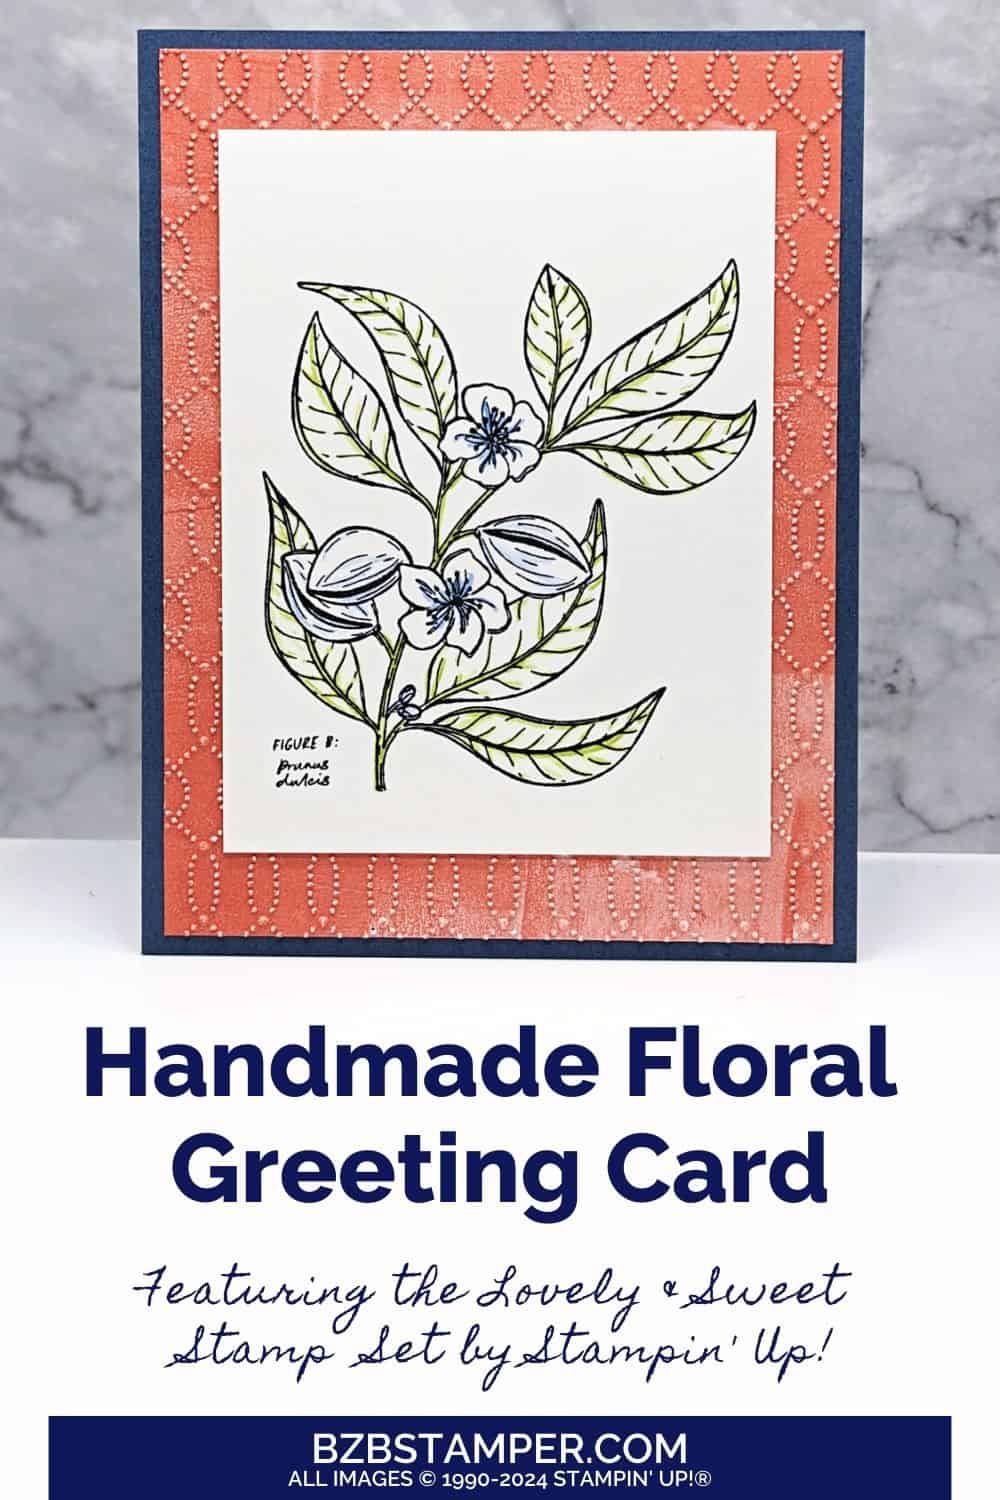 Lovely and Sweet Stamp Set

Features a floral image in blues and greens using coral and navy paper.  There is no sentiment on this card.